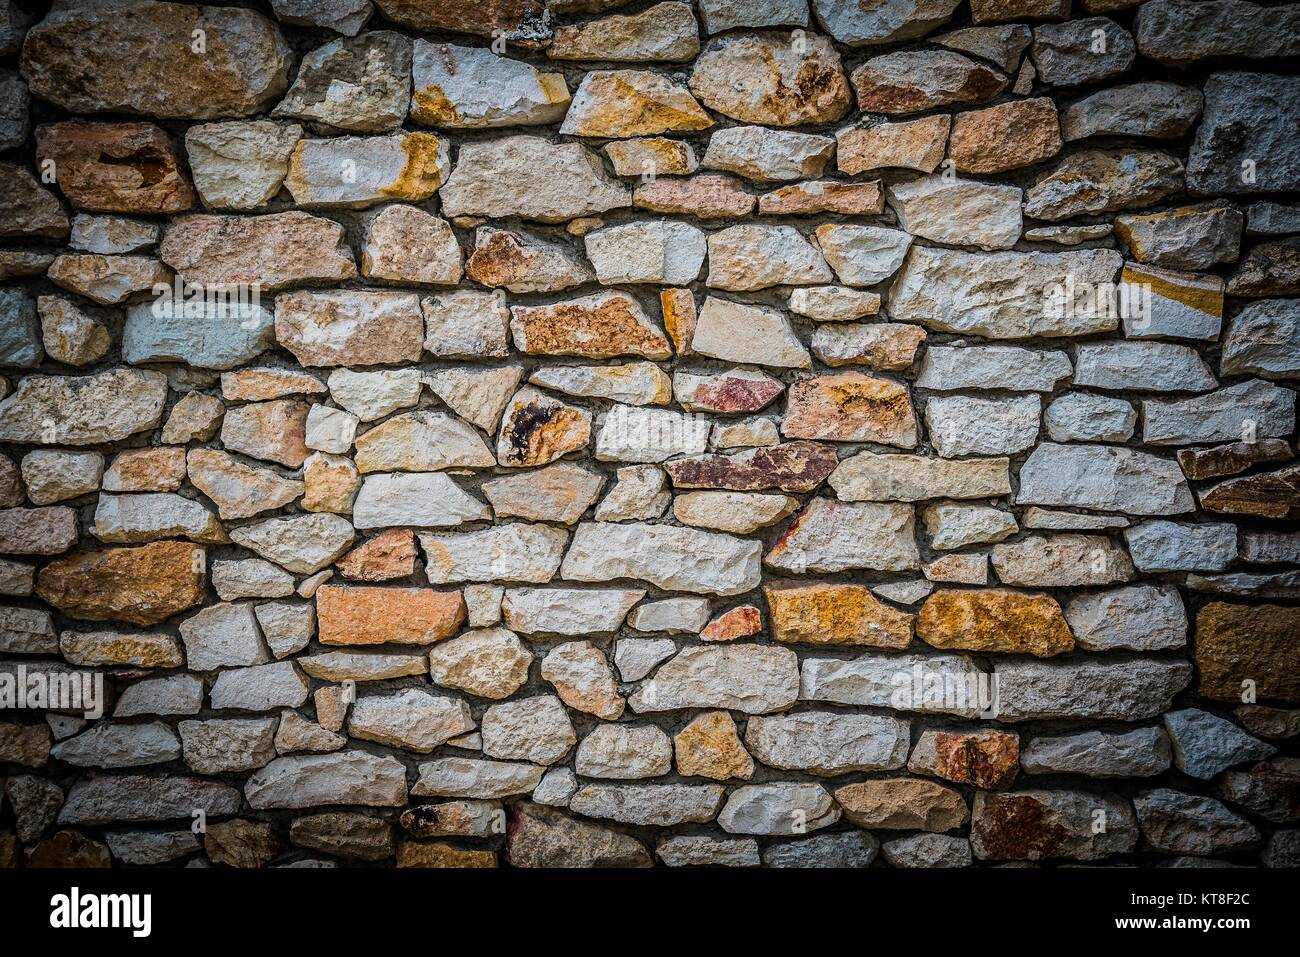 Stone wall background of colorful stones with HDR effect and vignetted borders Stock Photo